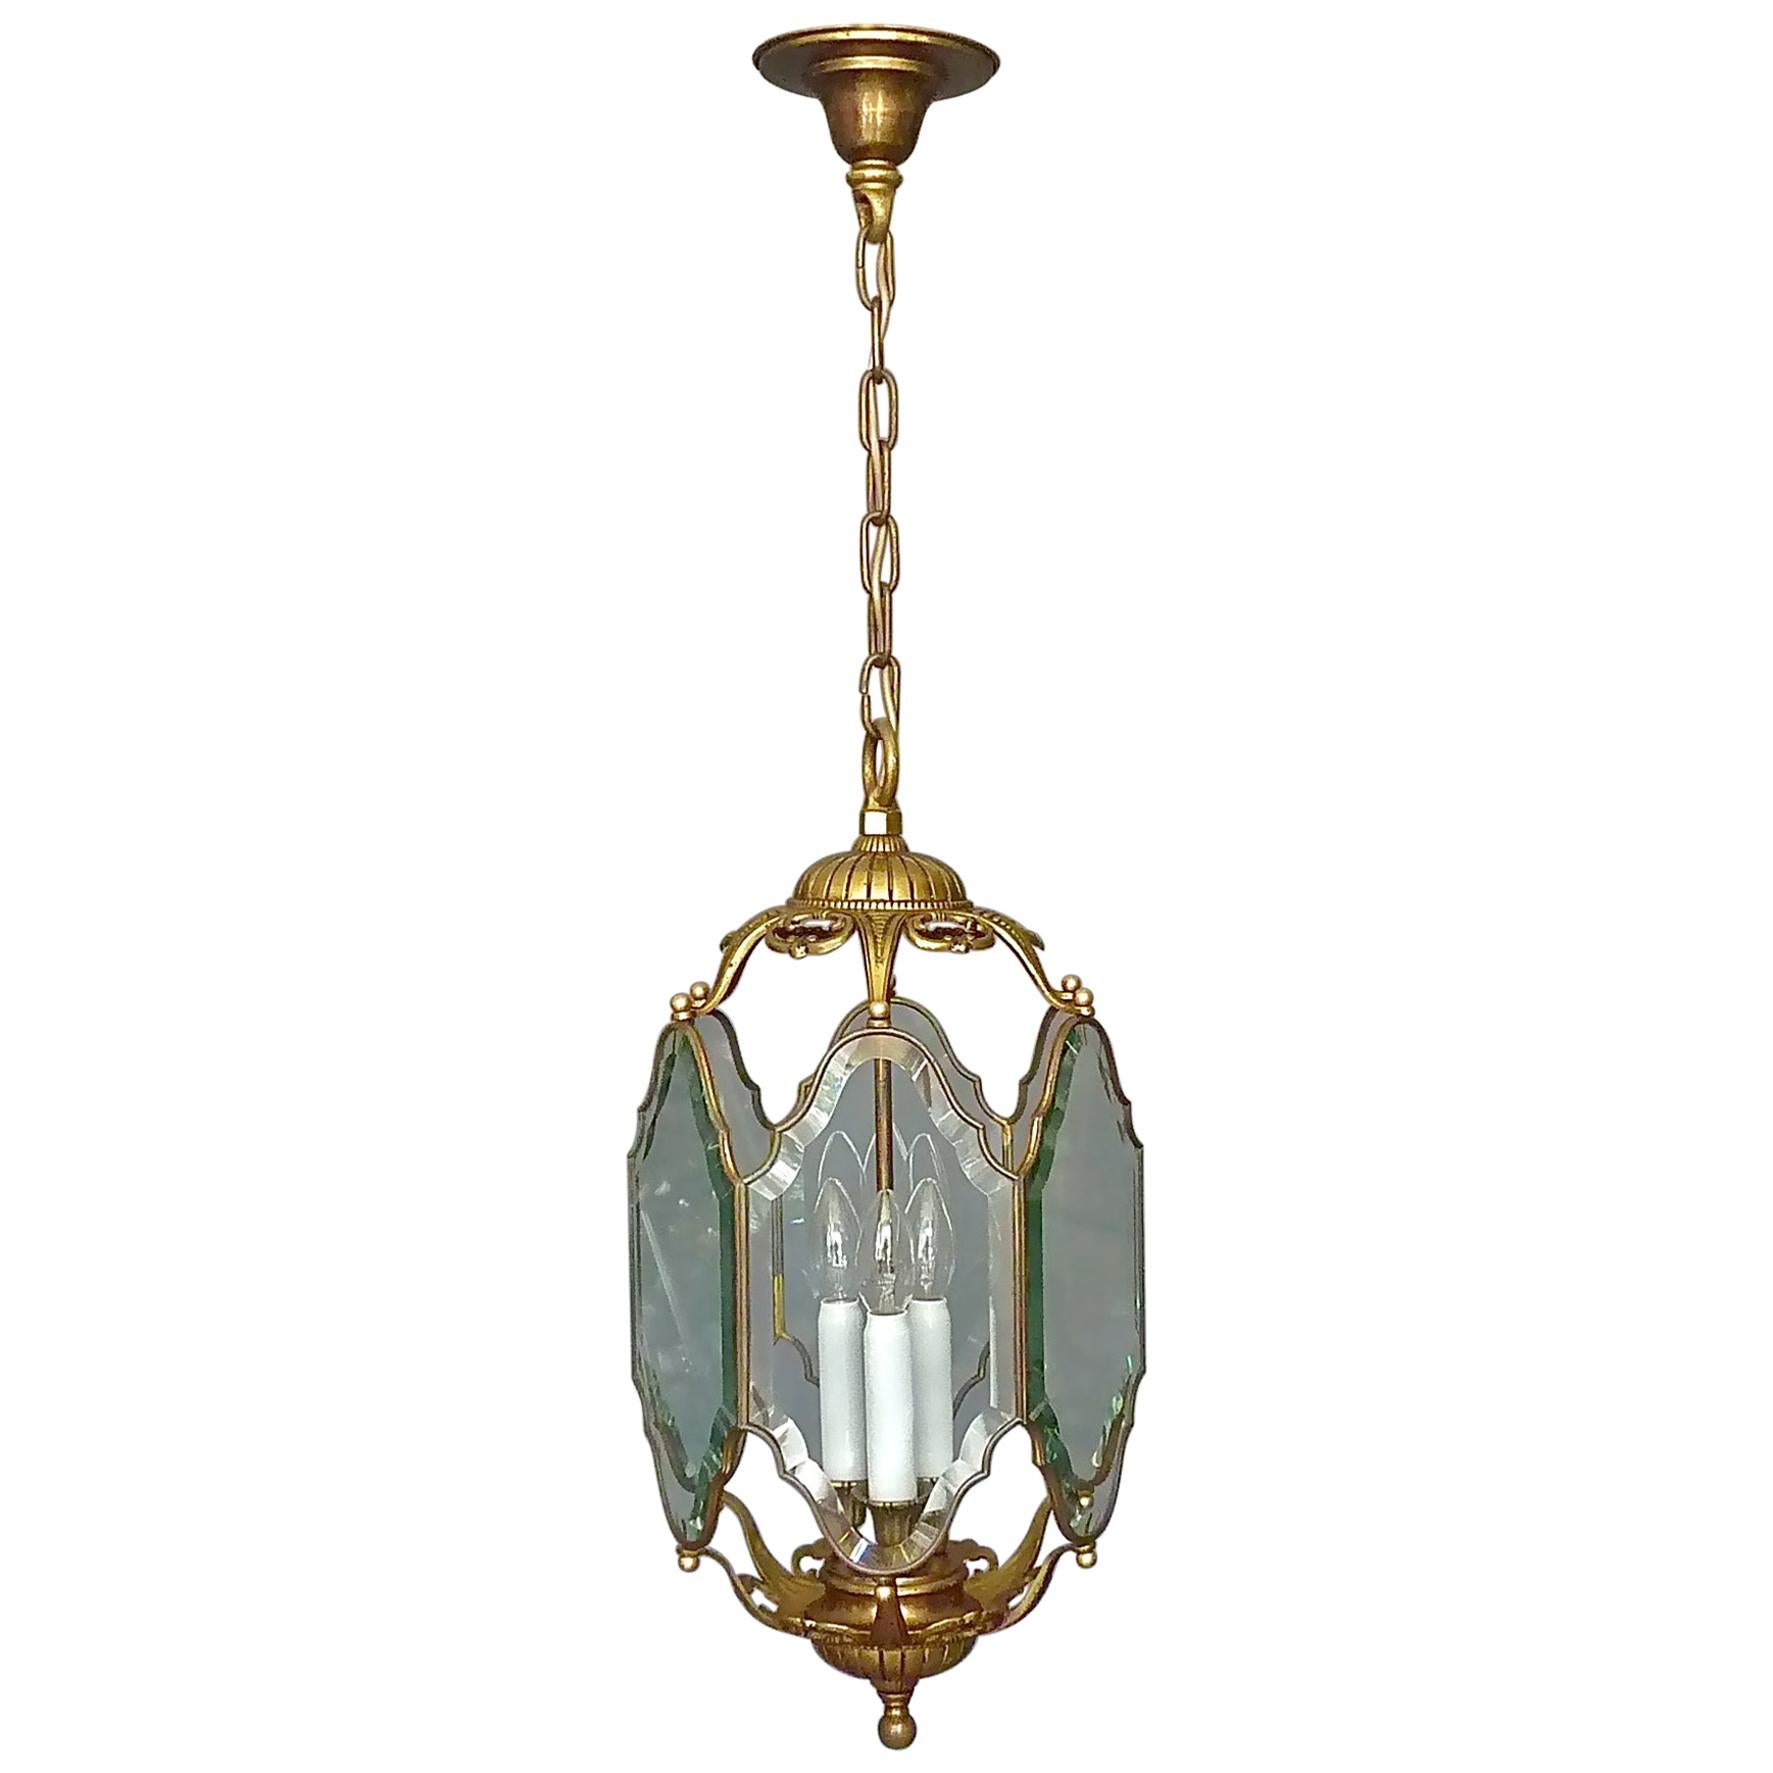 Large Antique French Lantern Lamp Faceted Crystal Glass Bronze Brass 1880 - 1900 For Sale